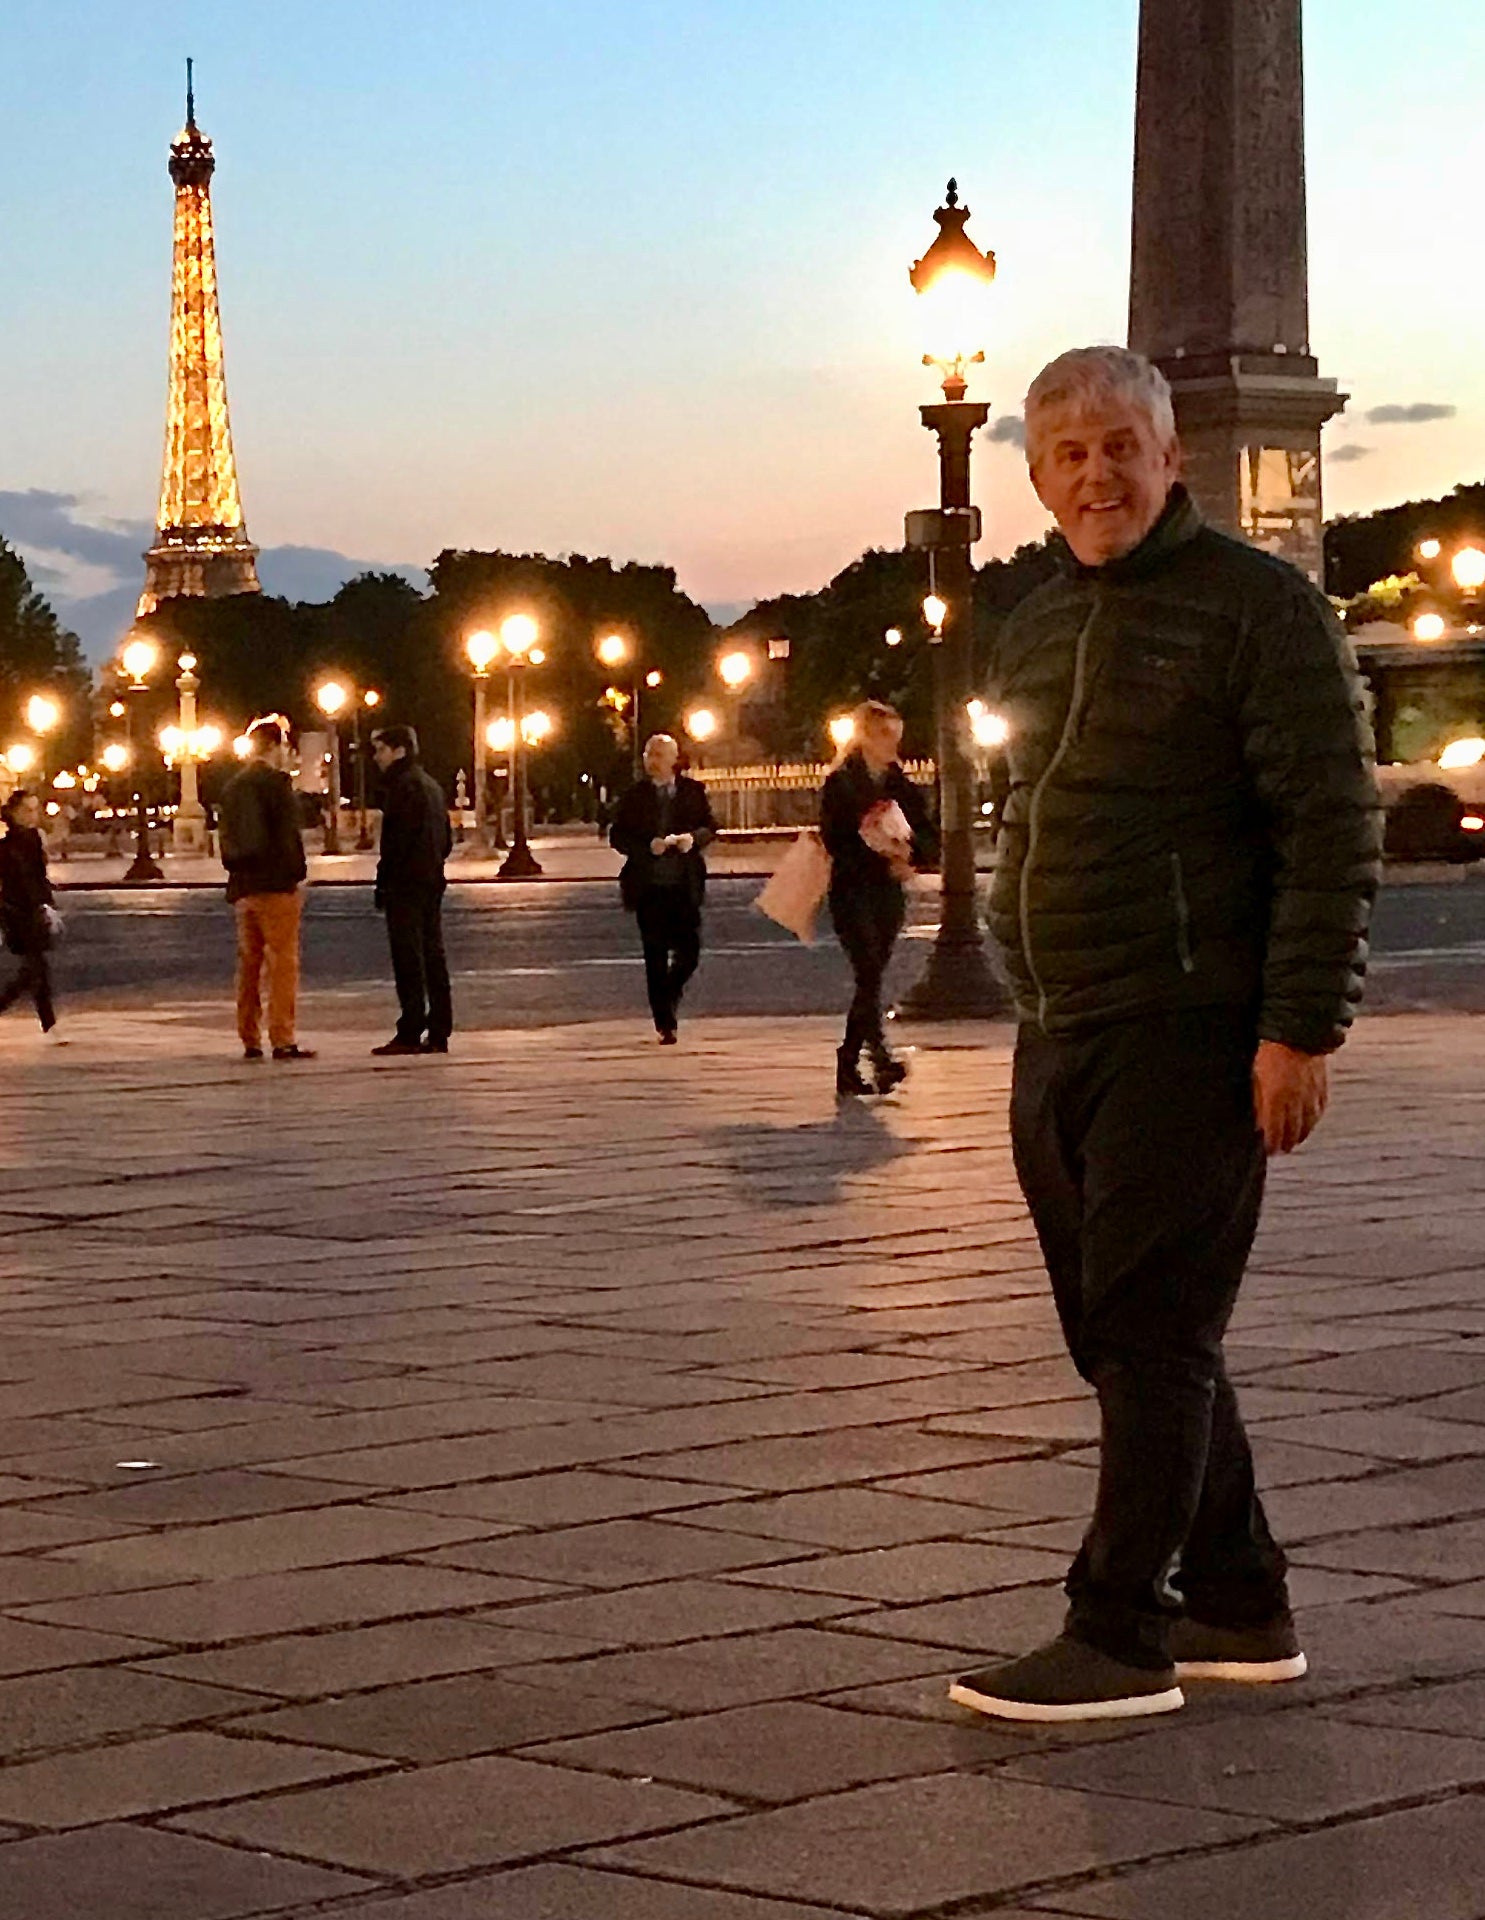 Tips for Paris from Someone Who Knows...